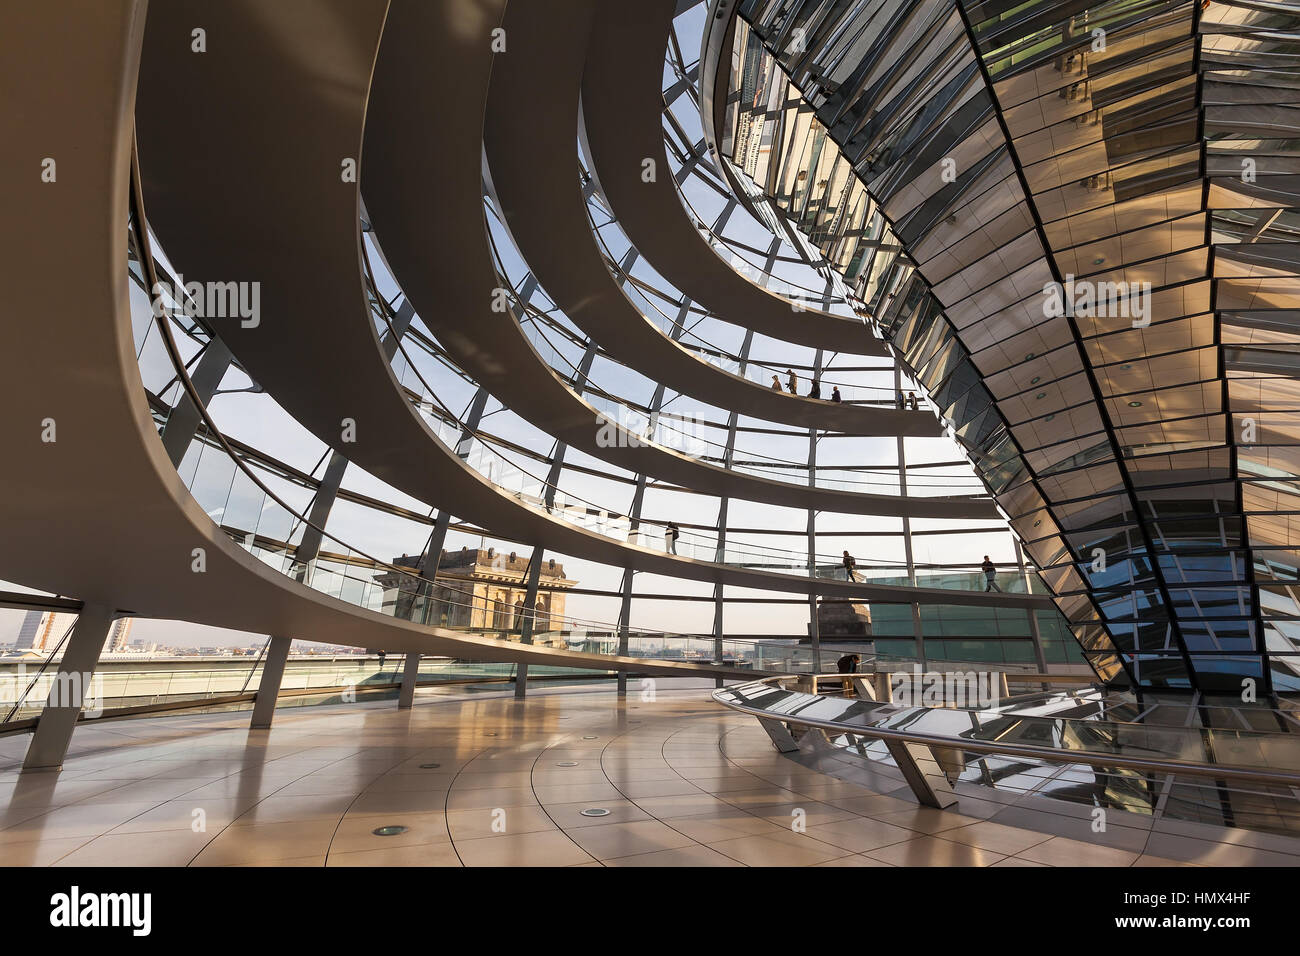 BERLIN, GERMANY - NOVEMBER 1, 2015: Wide angle view inside the glass dome on top of the Reichstag building. Stock Photo